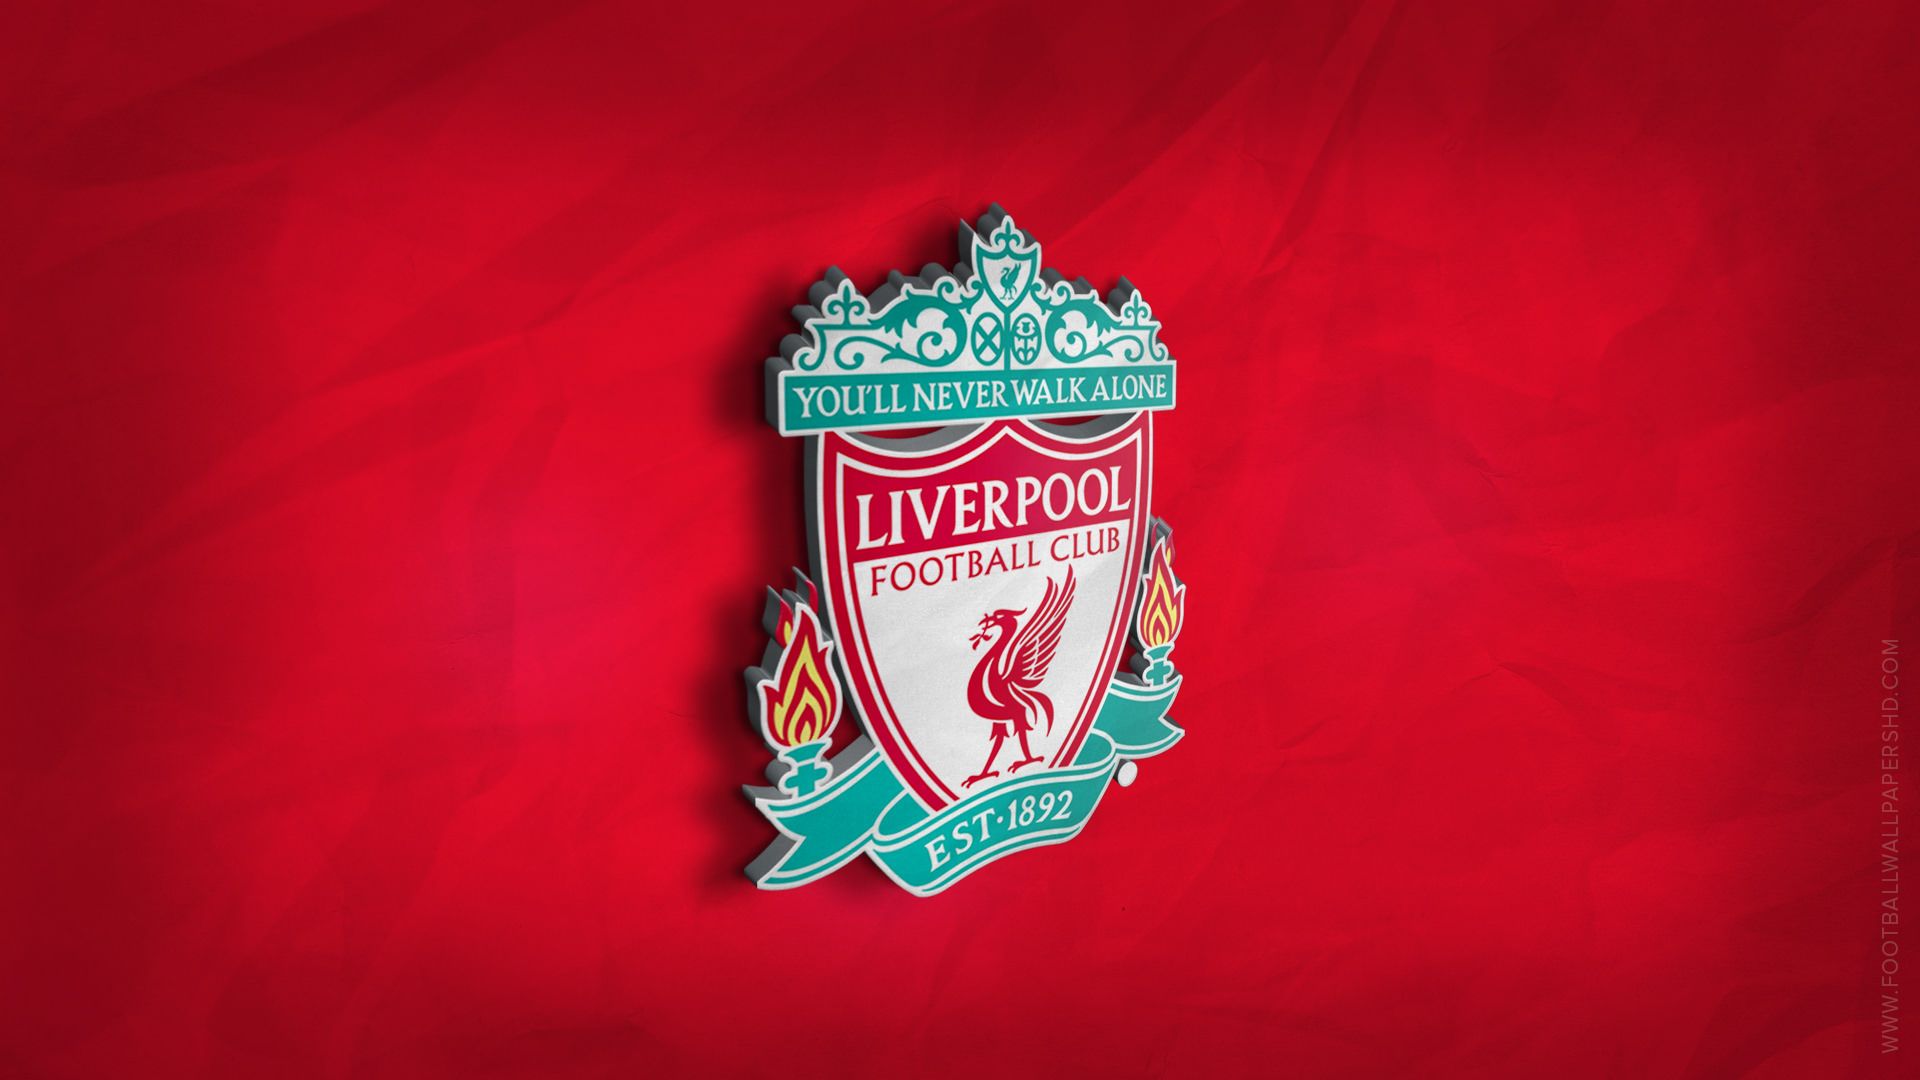 Motolani 'Idan' Alake on X: I have tears in my eyes right now, with a heart  filled with gratitude. Finally gonna see Liverpool lift a league title. I'm  so happy. #LFC  /